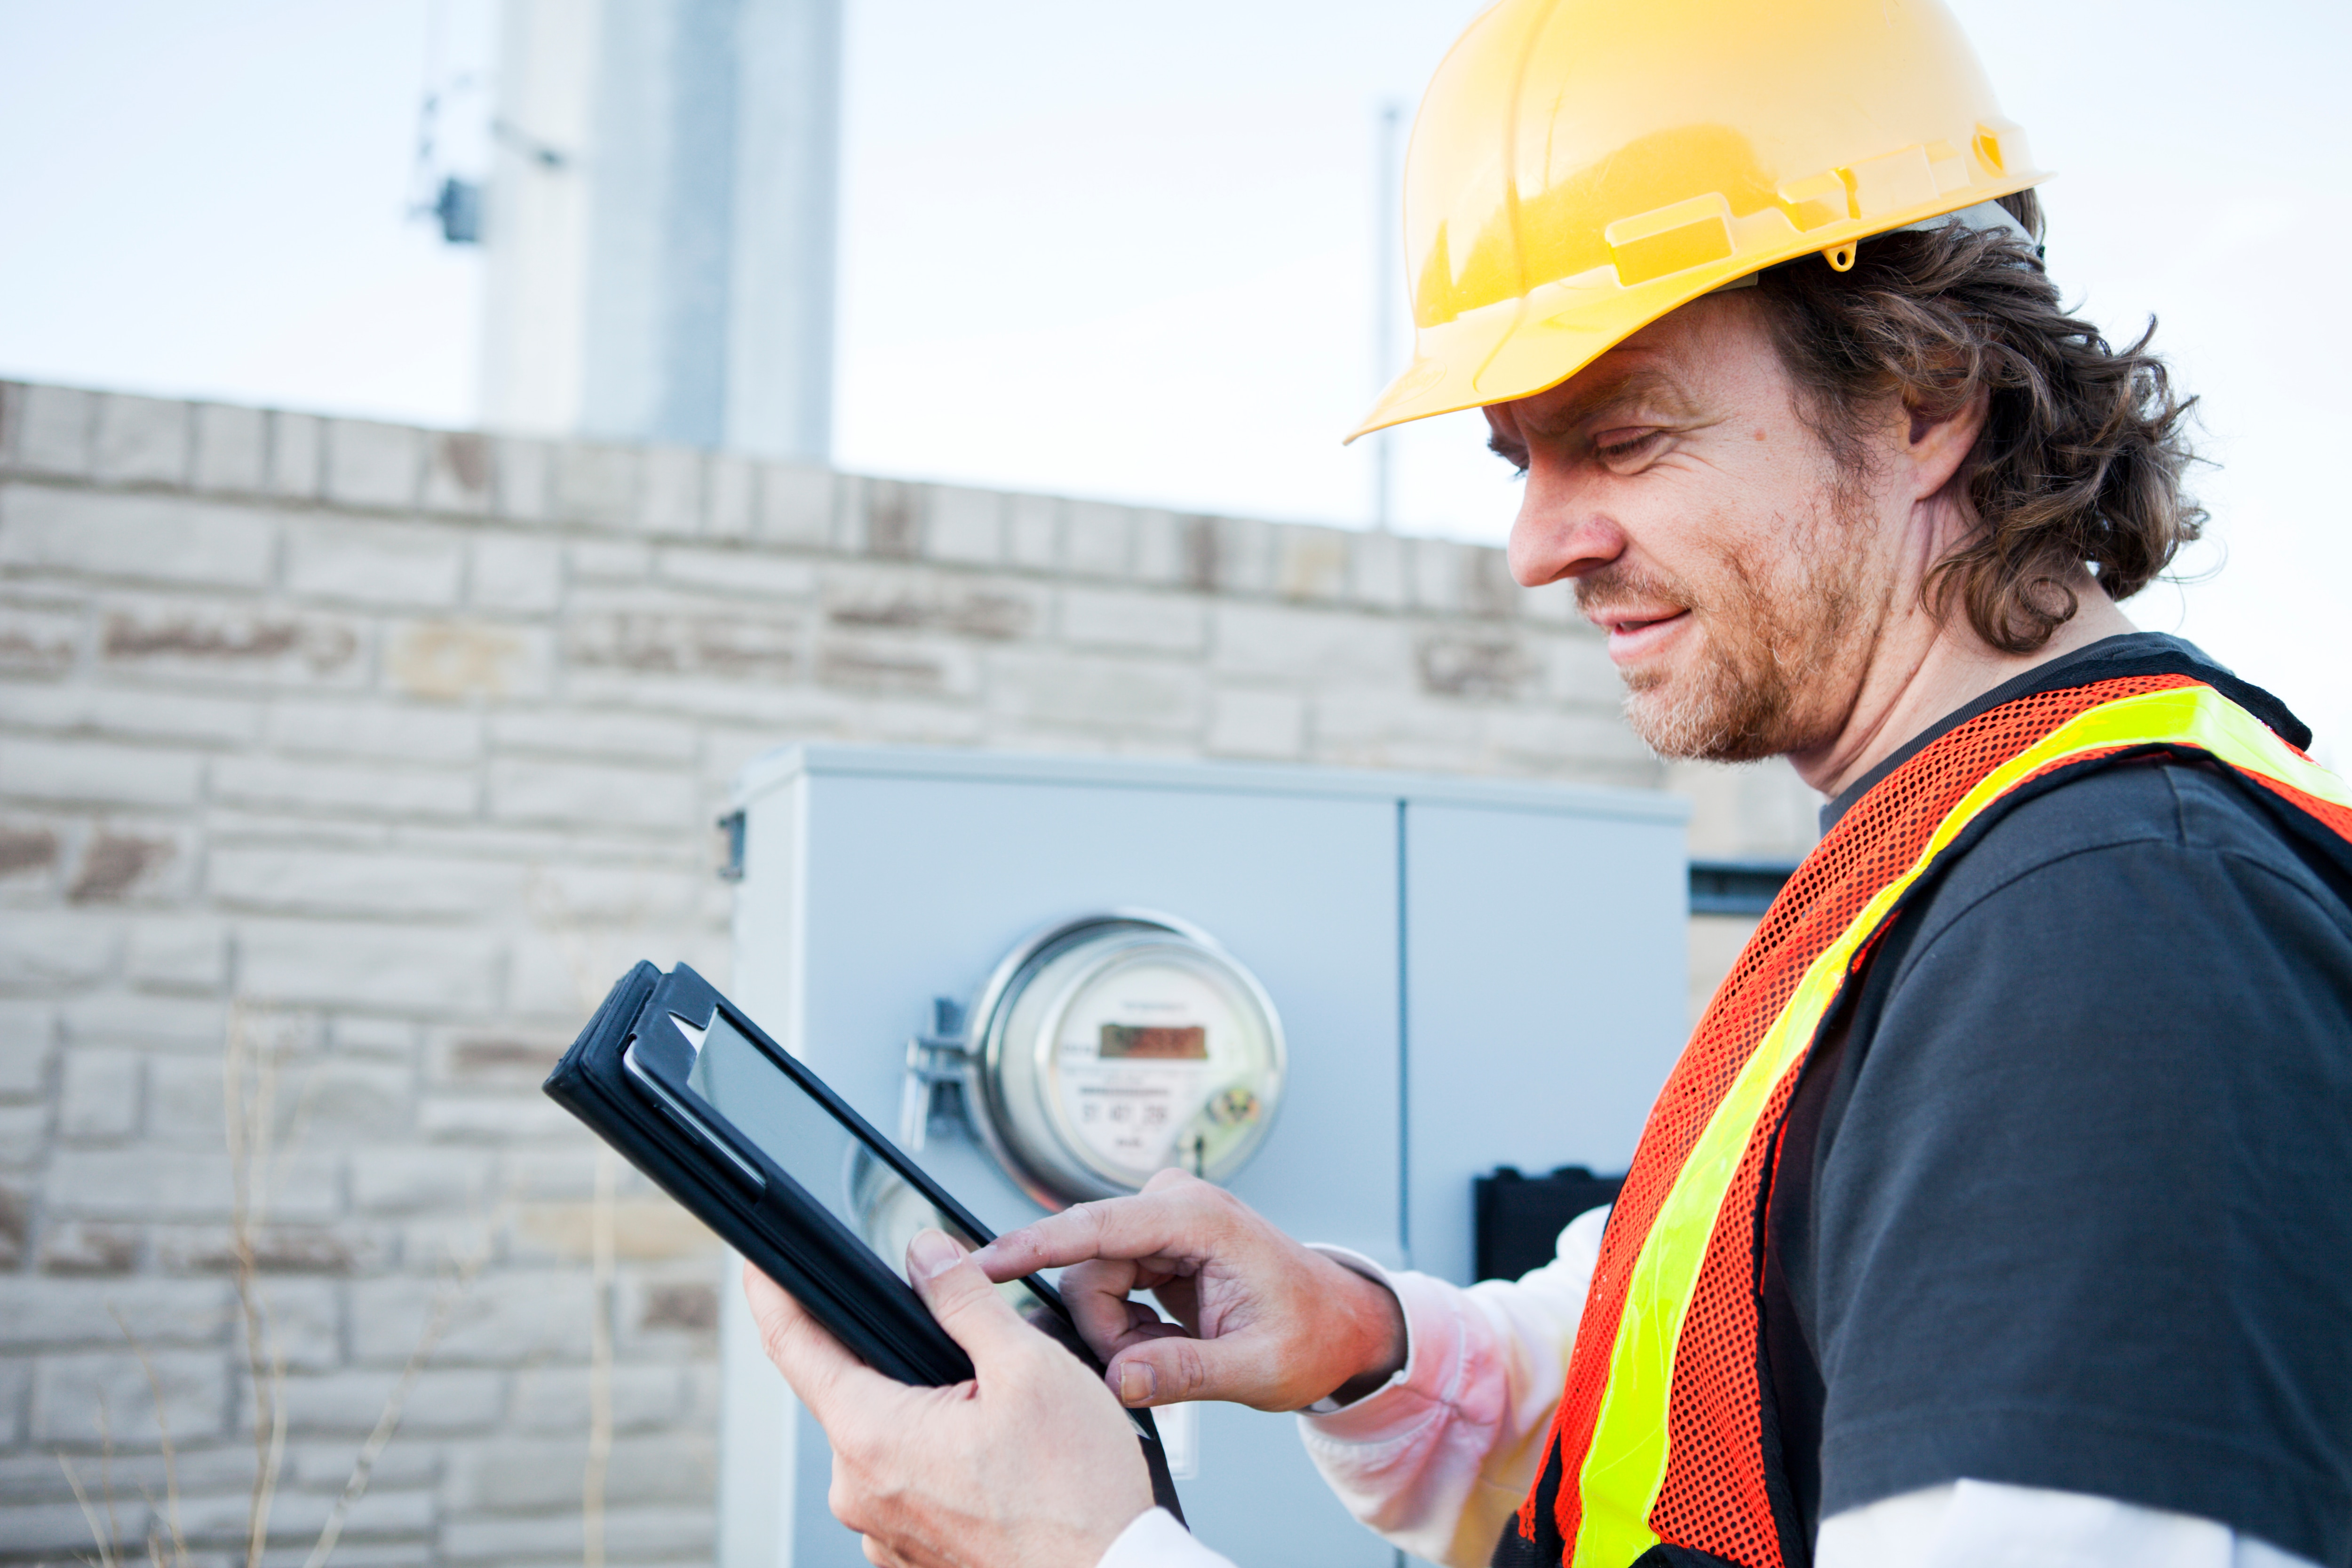 Utility worker on an iPad in front of an electricity meter